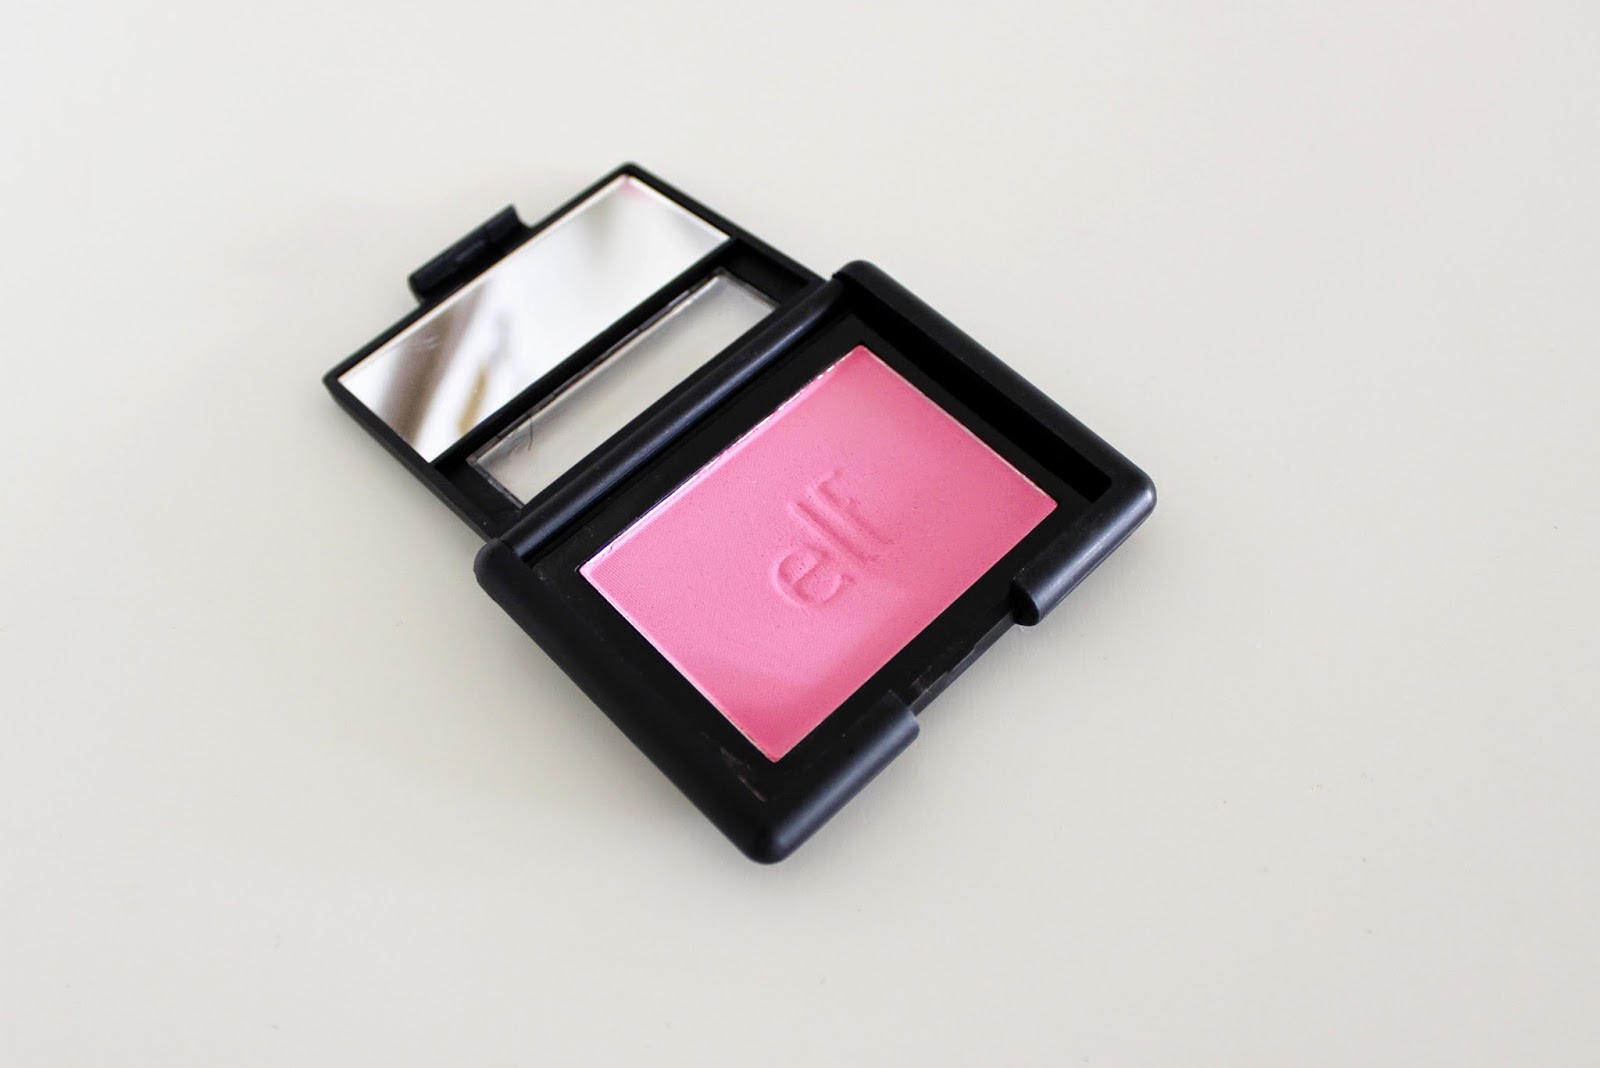 ELF Studio Blush in Pink Passion review! – Harman's Beauty Blog